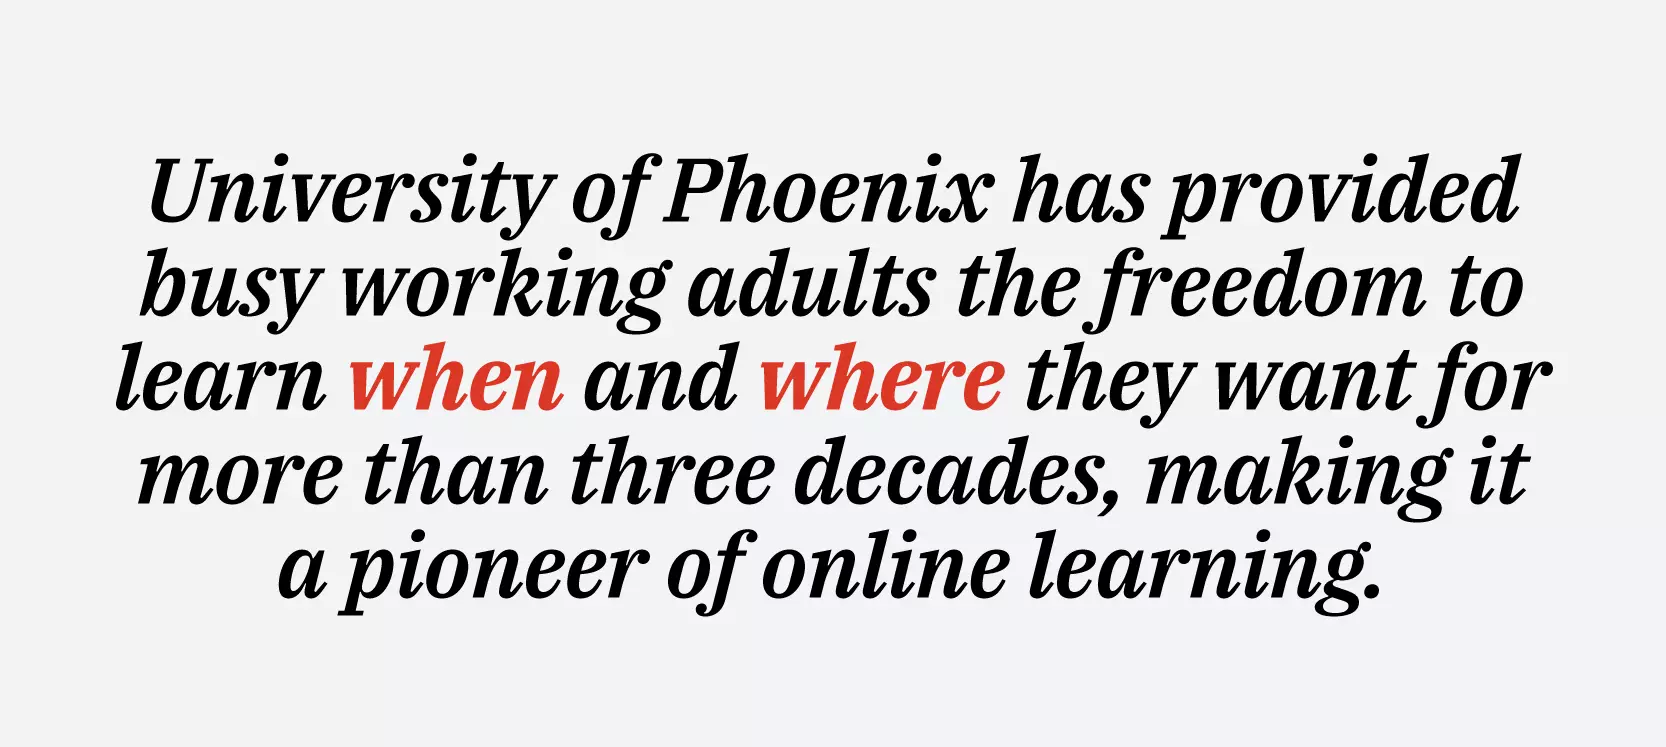 ۴ý has provided busy working adults the freedom to learn when and where they want for more than three decades, making it a pioneer of online learning.